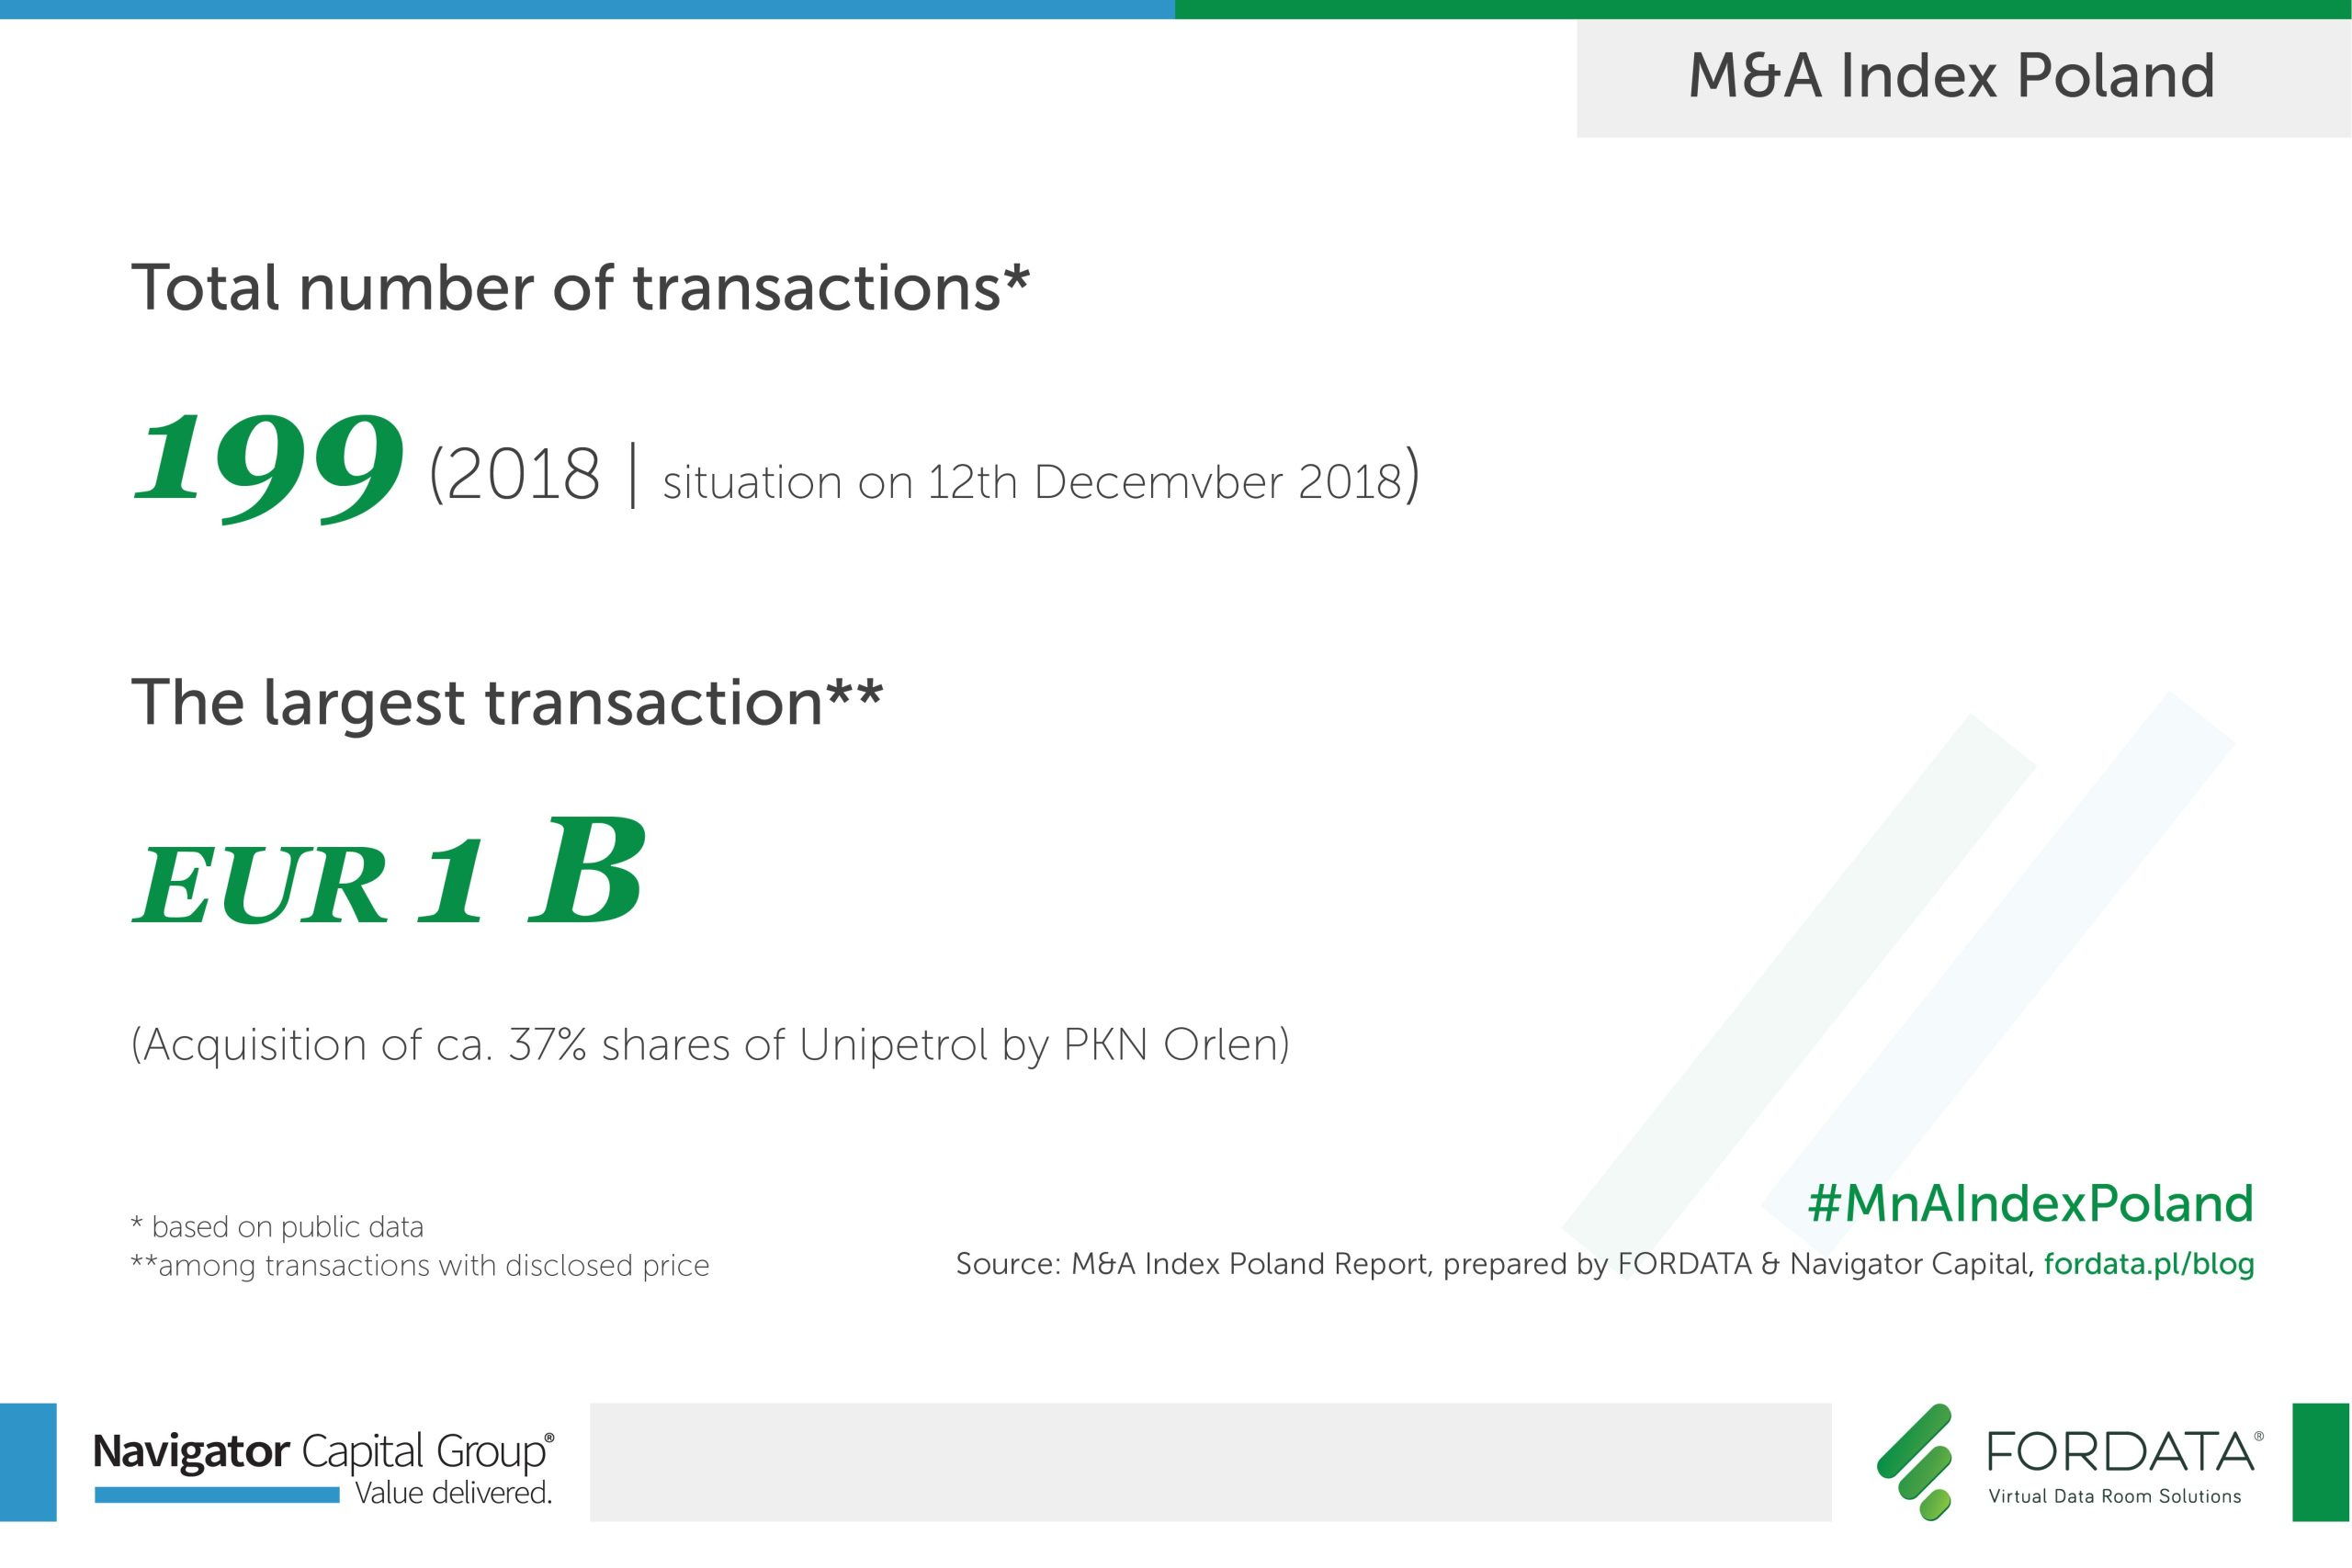 Total number of transactions in 2018 Poland